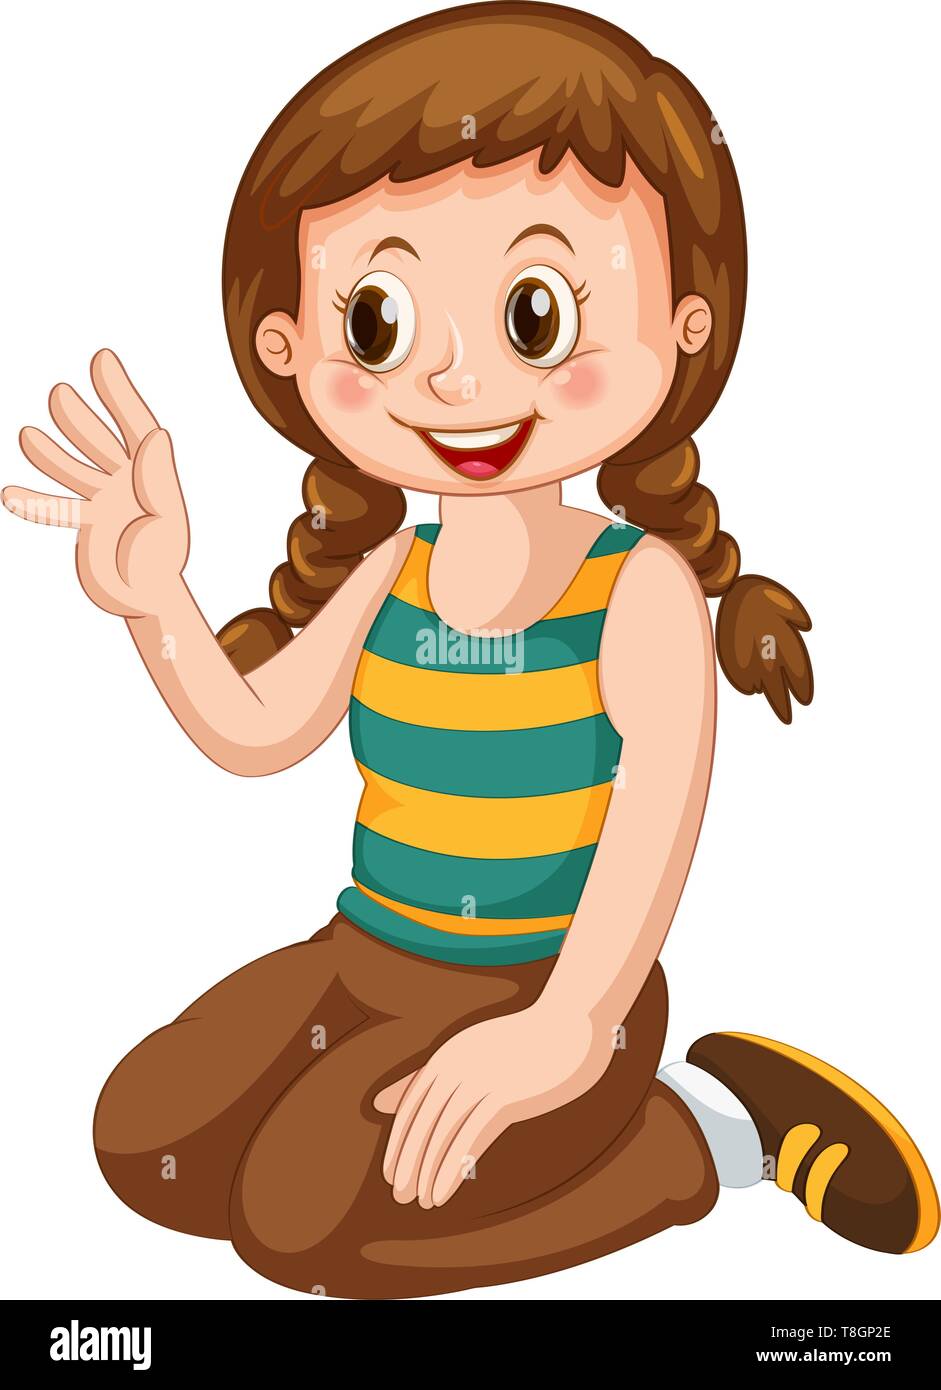 A cute girl character illustration Stock Vector